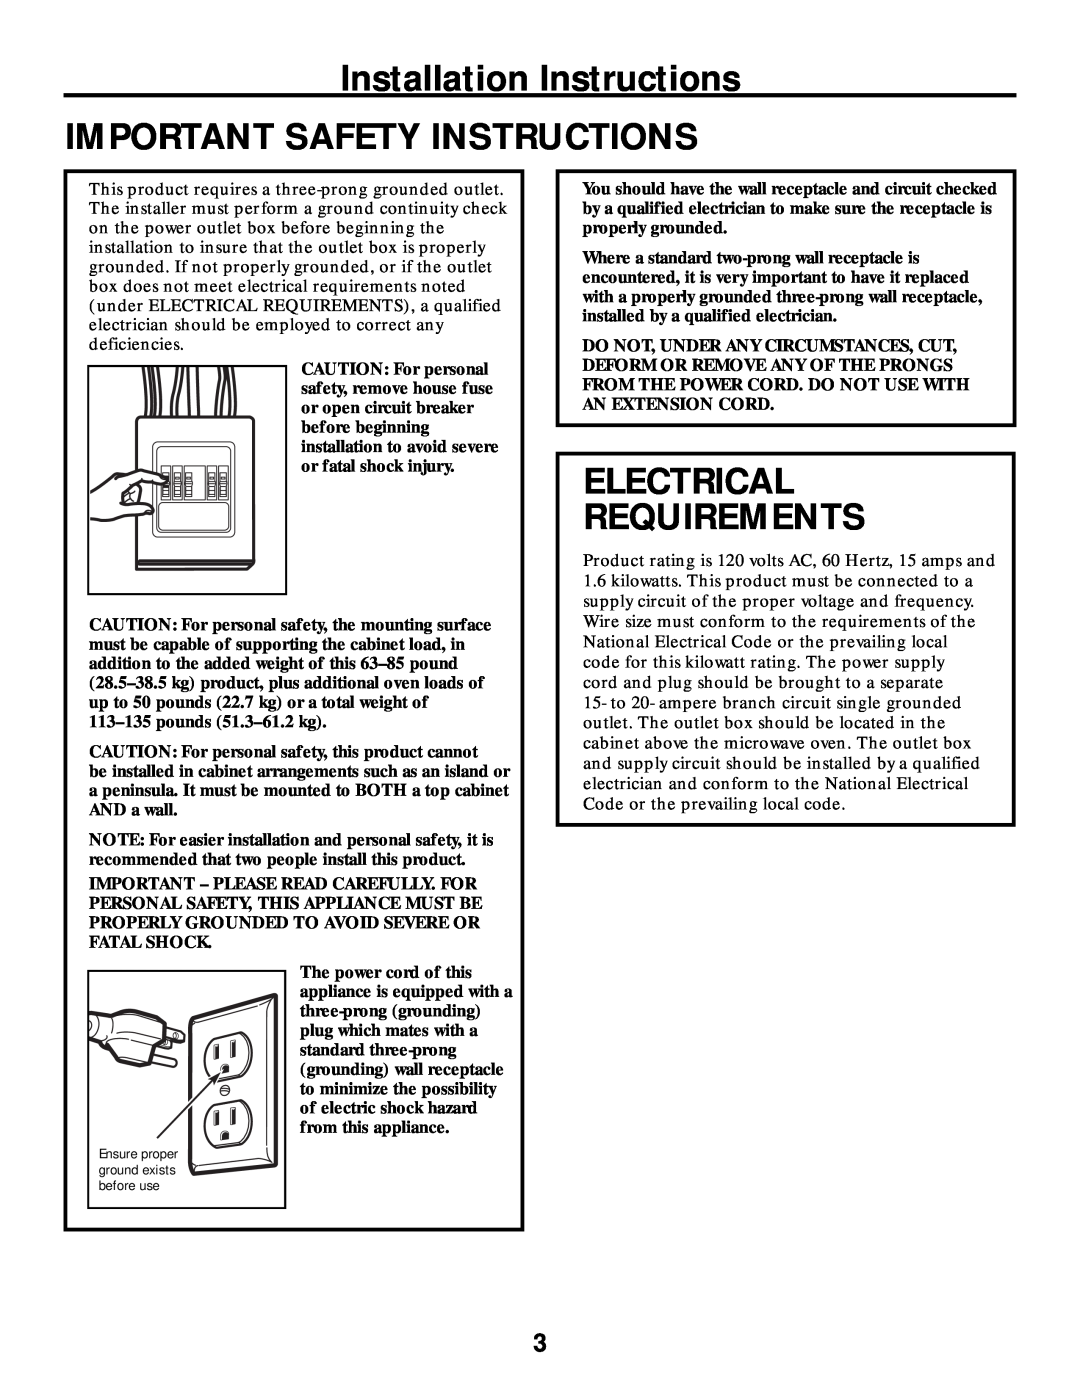 Frigidaire 316495064 warranty Important Safety Instructions, Electrical Requirements, Installation Instructions 